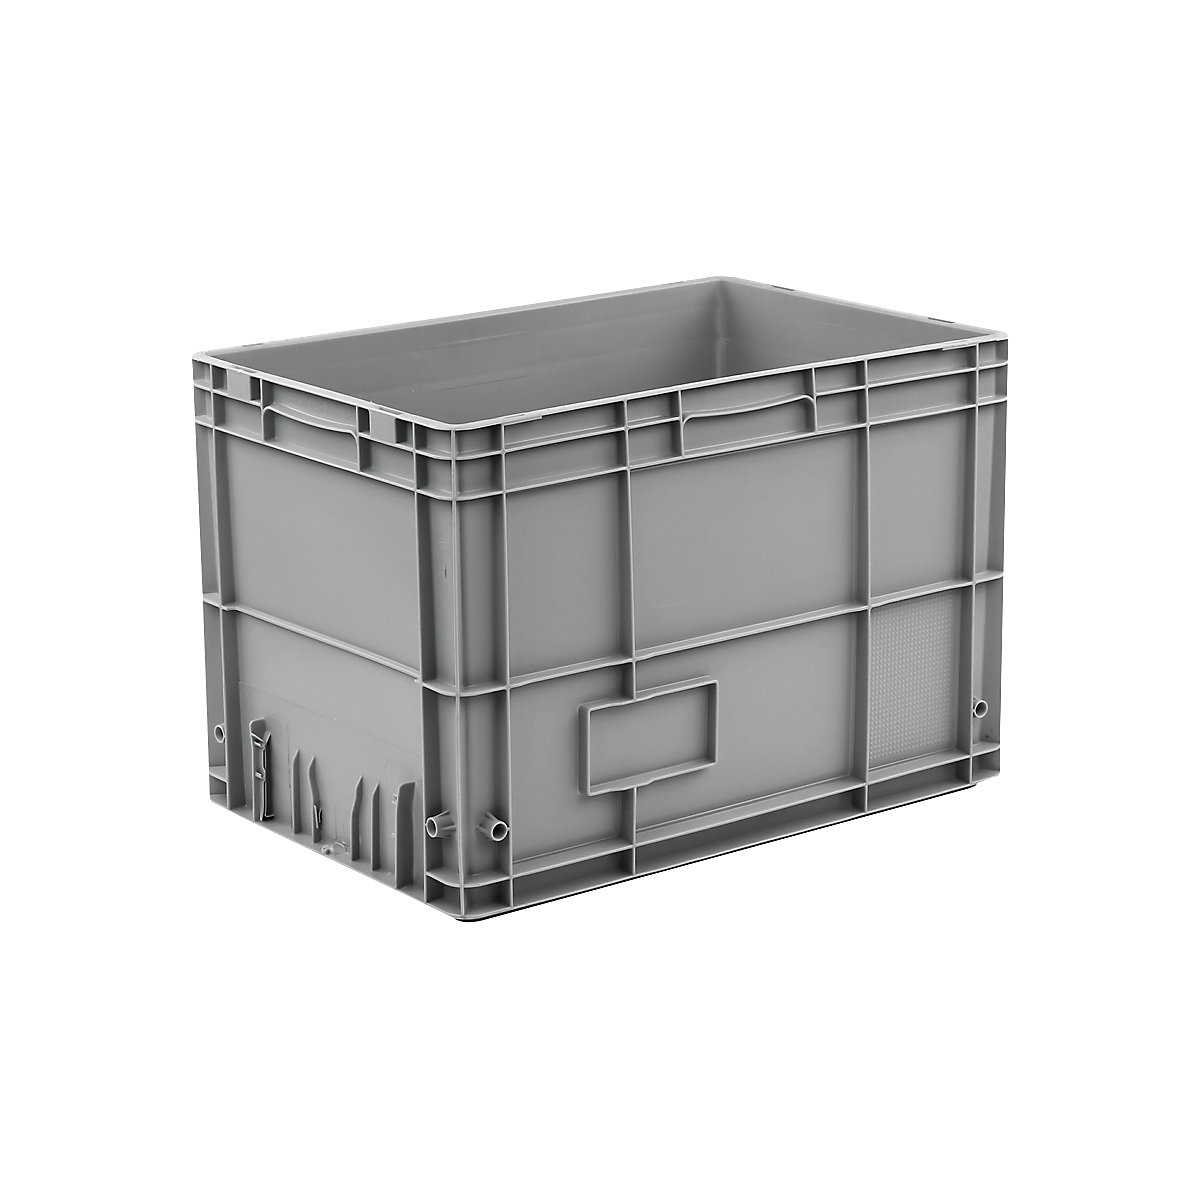 Euro stacking container